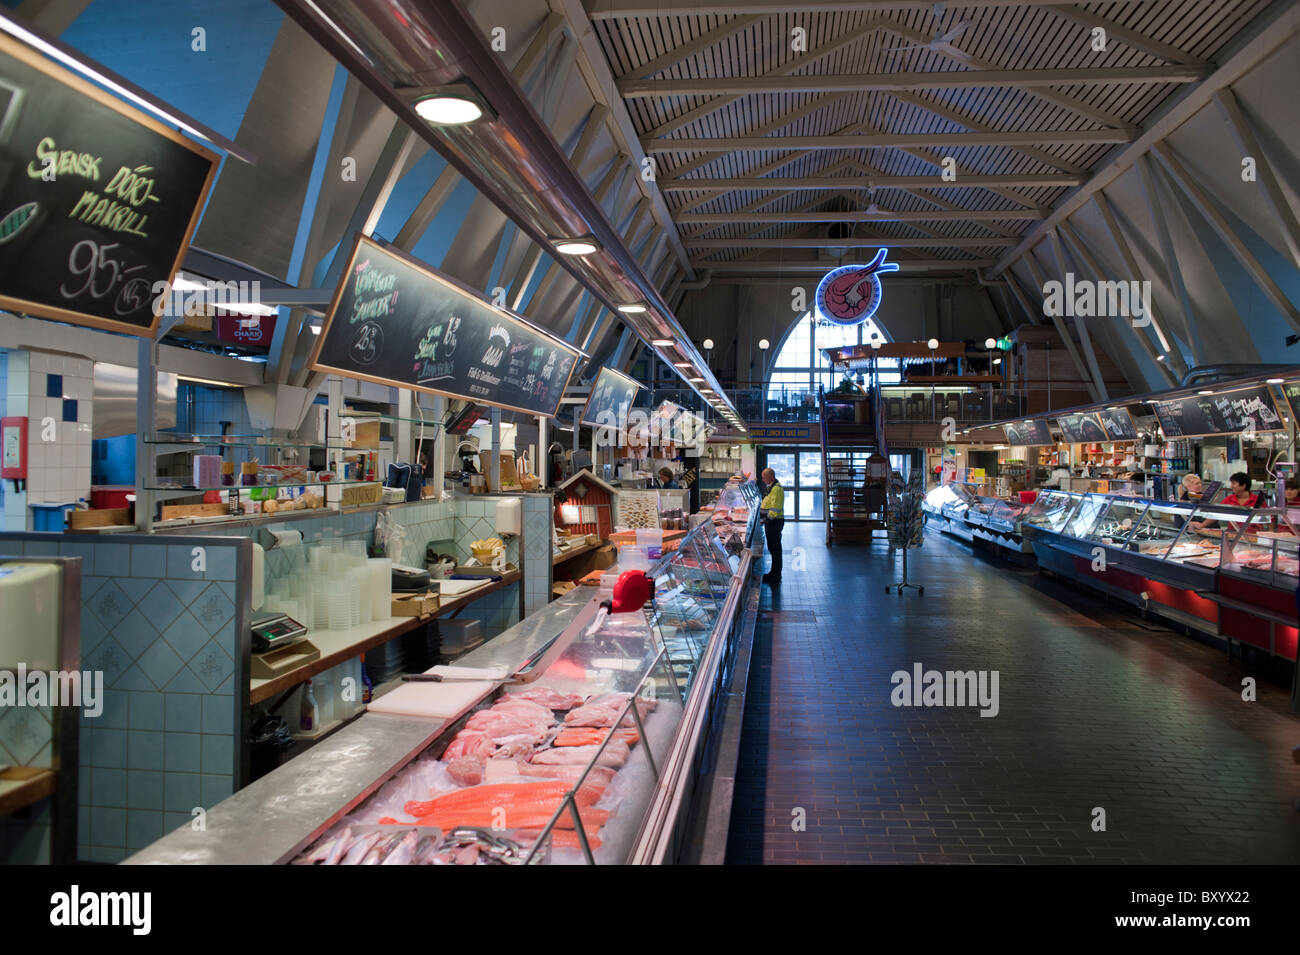 Interior of the Gothenburg city fish market, also known as the Fish Church (Feskekôrka), Sweden. Stock Photo